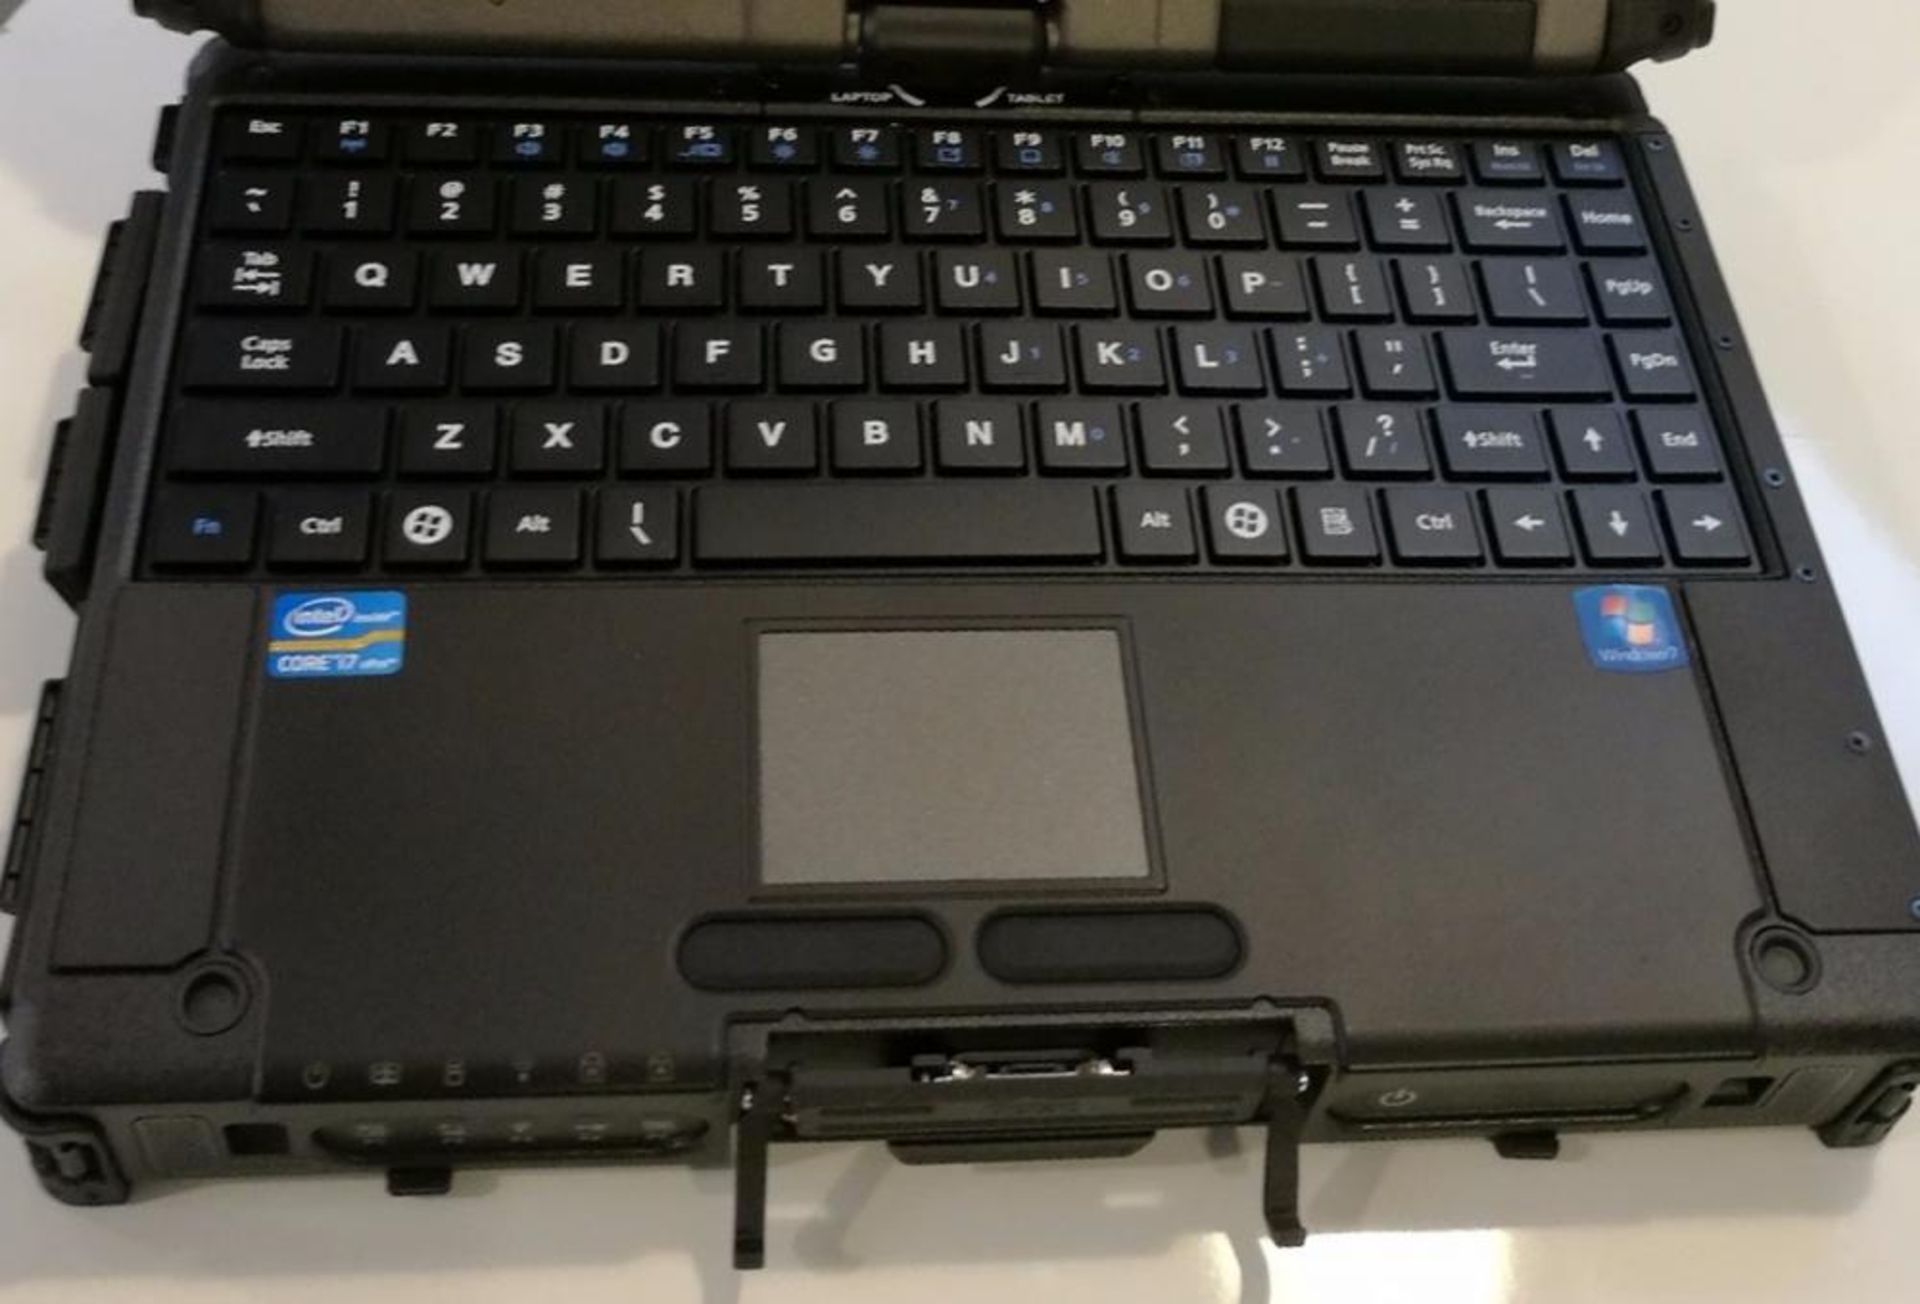 1 x Getac V200 Rugged Laptop Computer - Rugged Laptop That Transforms into a Tablet PC - Features an - Image 9 of 9